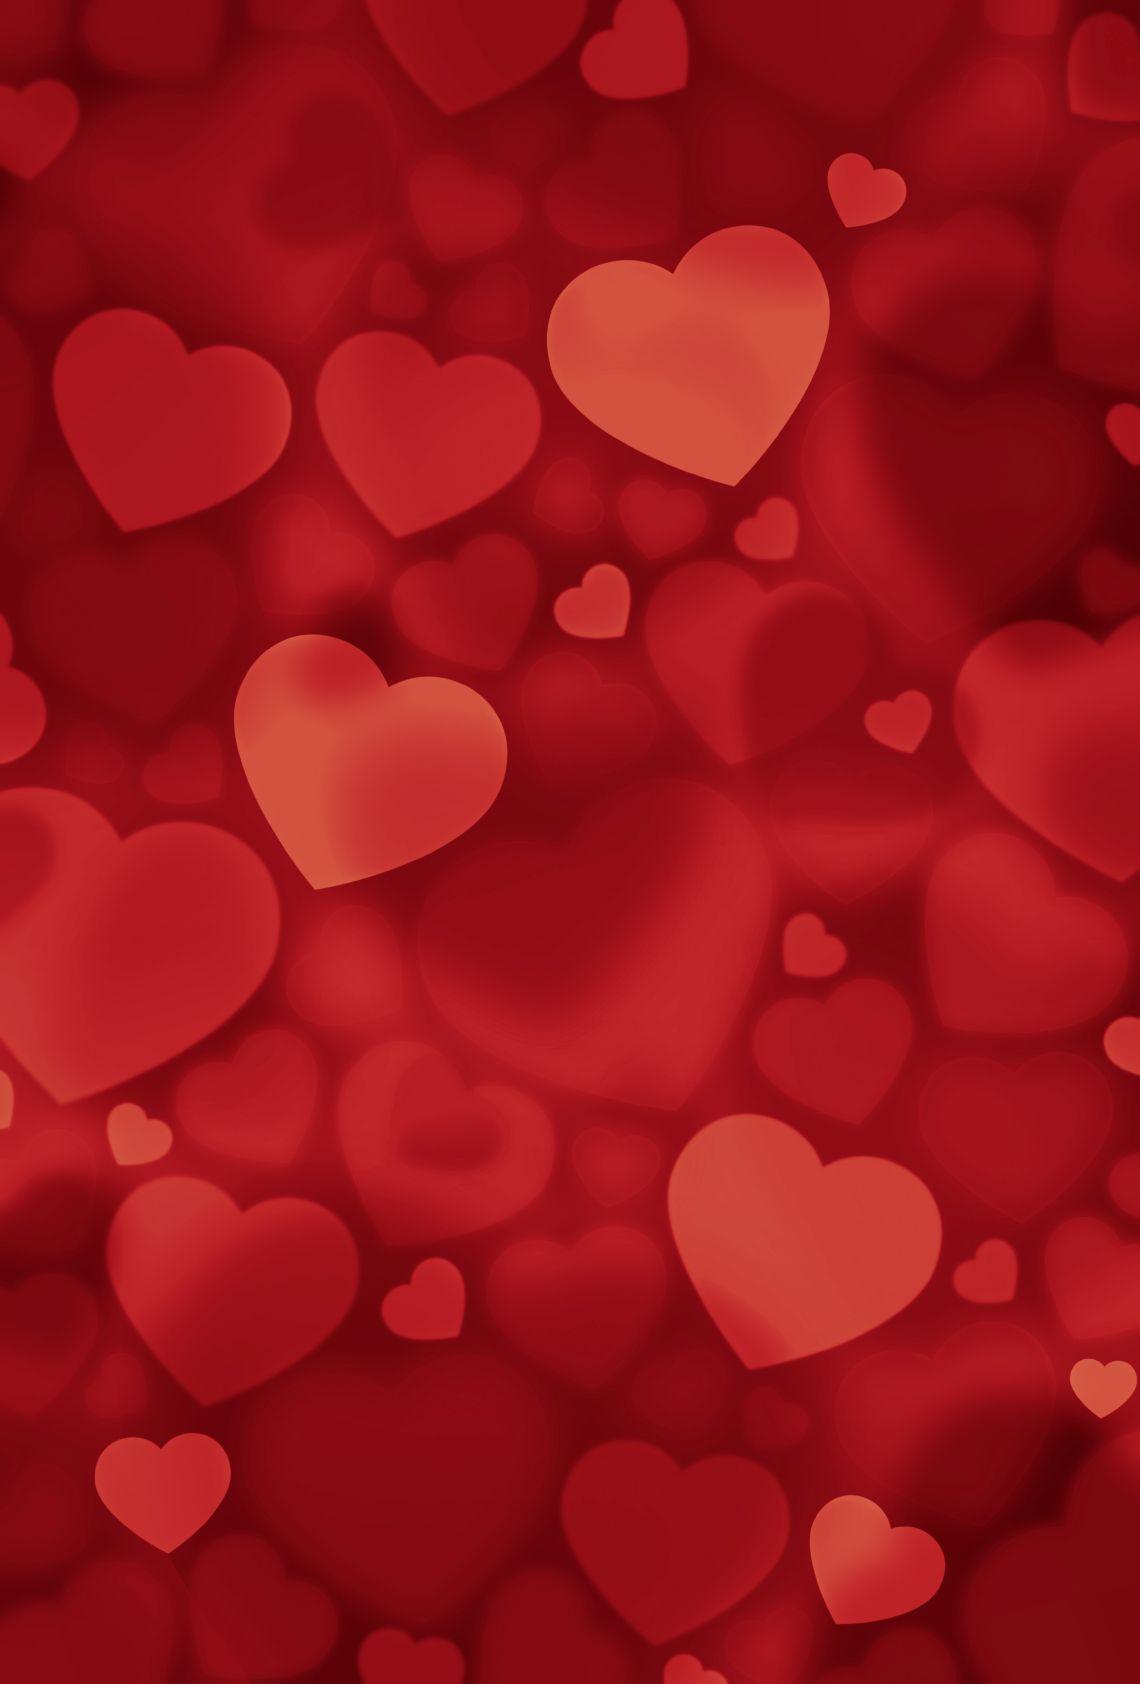 ♥♥♥RED HEARTS Wallpaper♥♥♥~